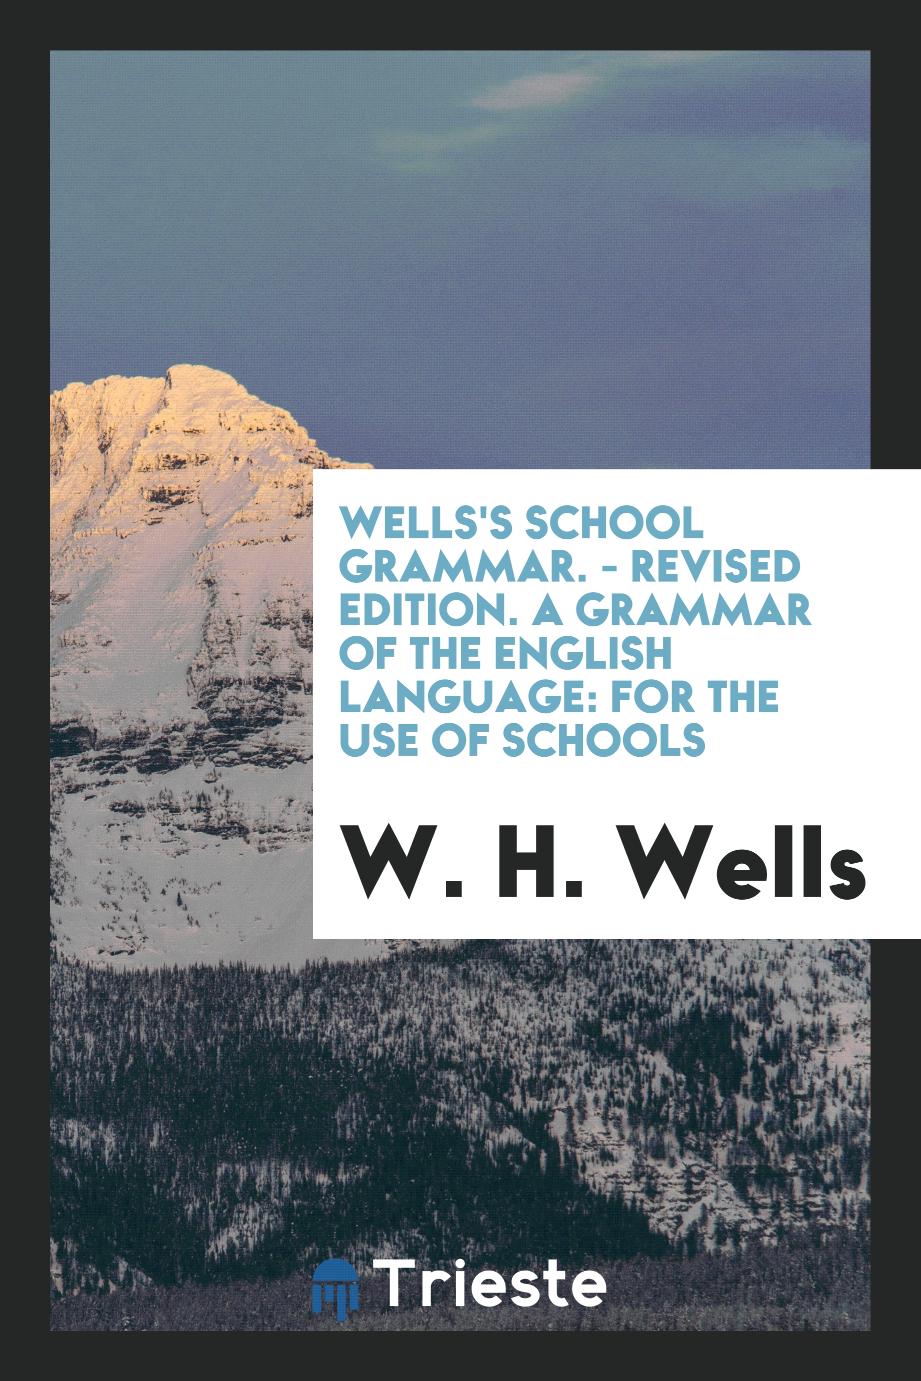 Wells's School Grammar. - Revised Edition. A Grammar of the English Language: For the Use of Schools